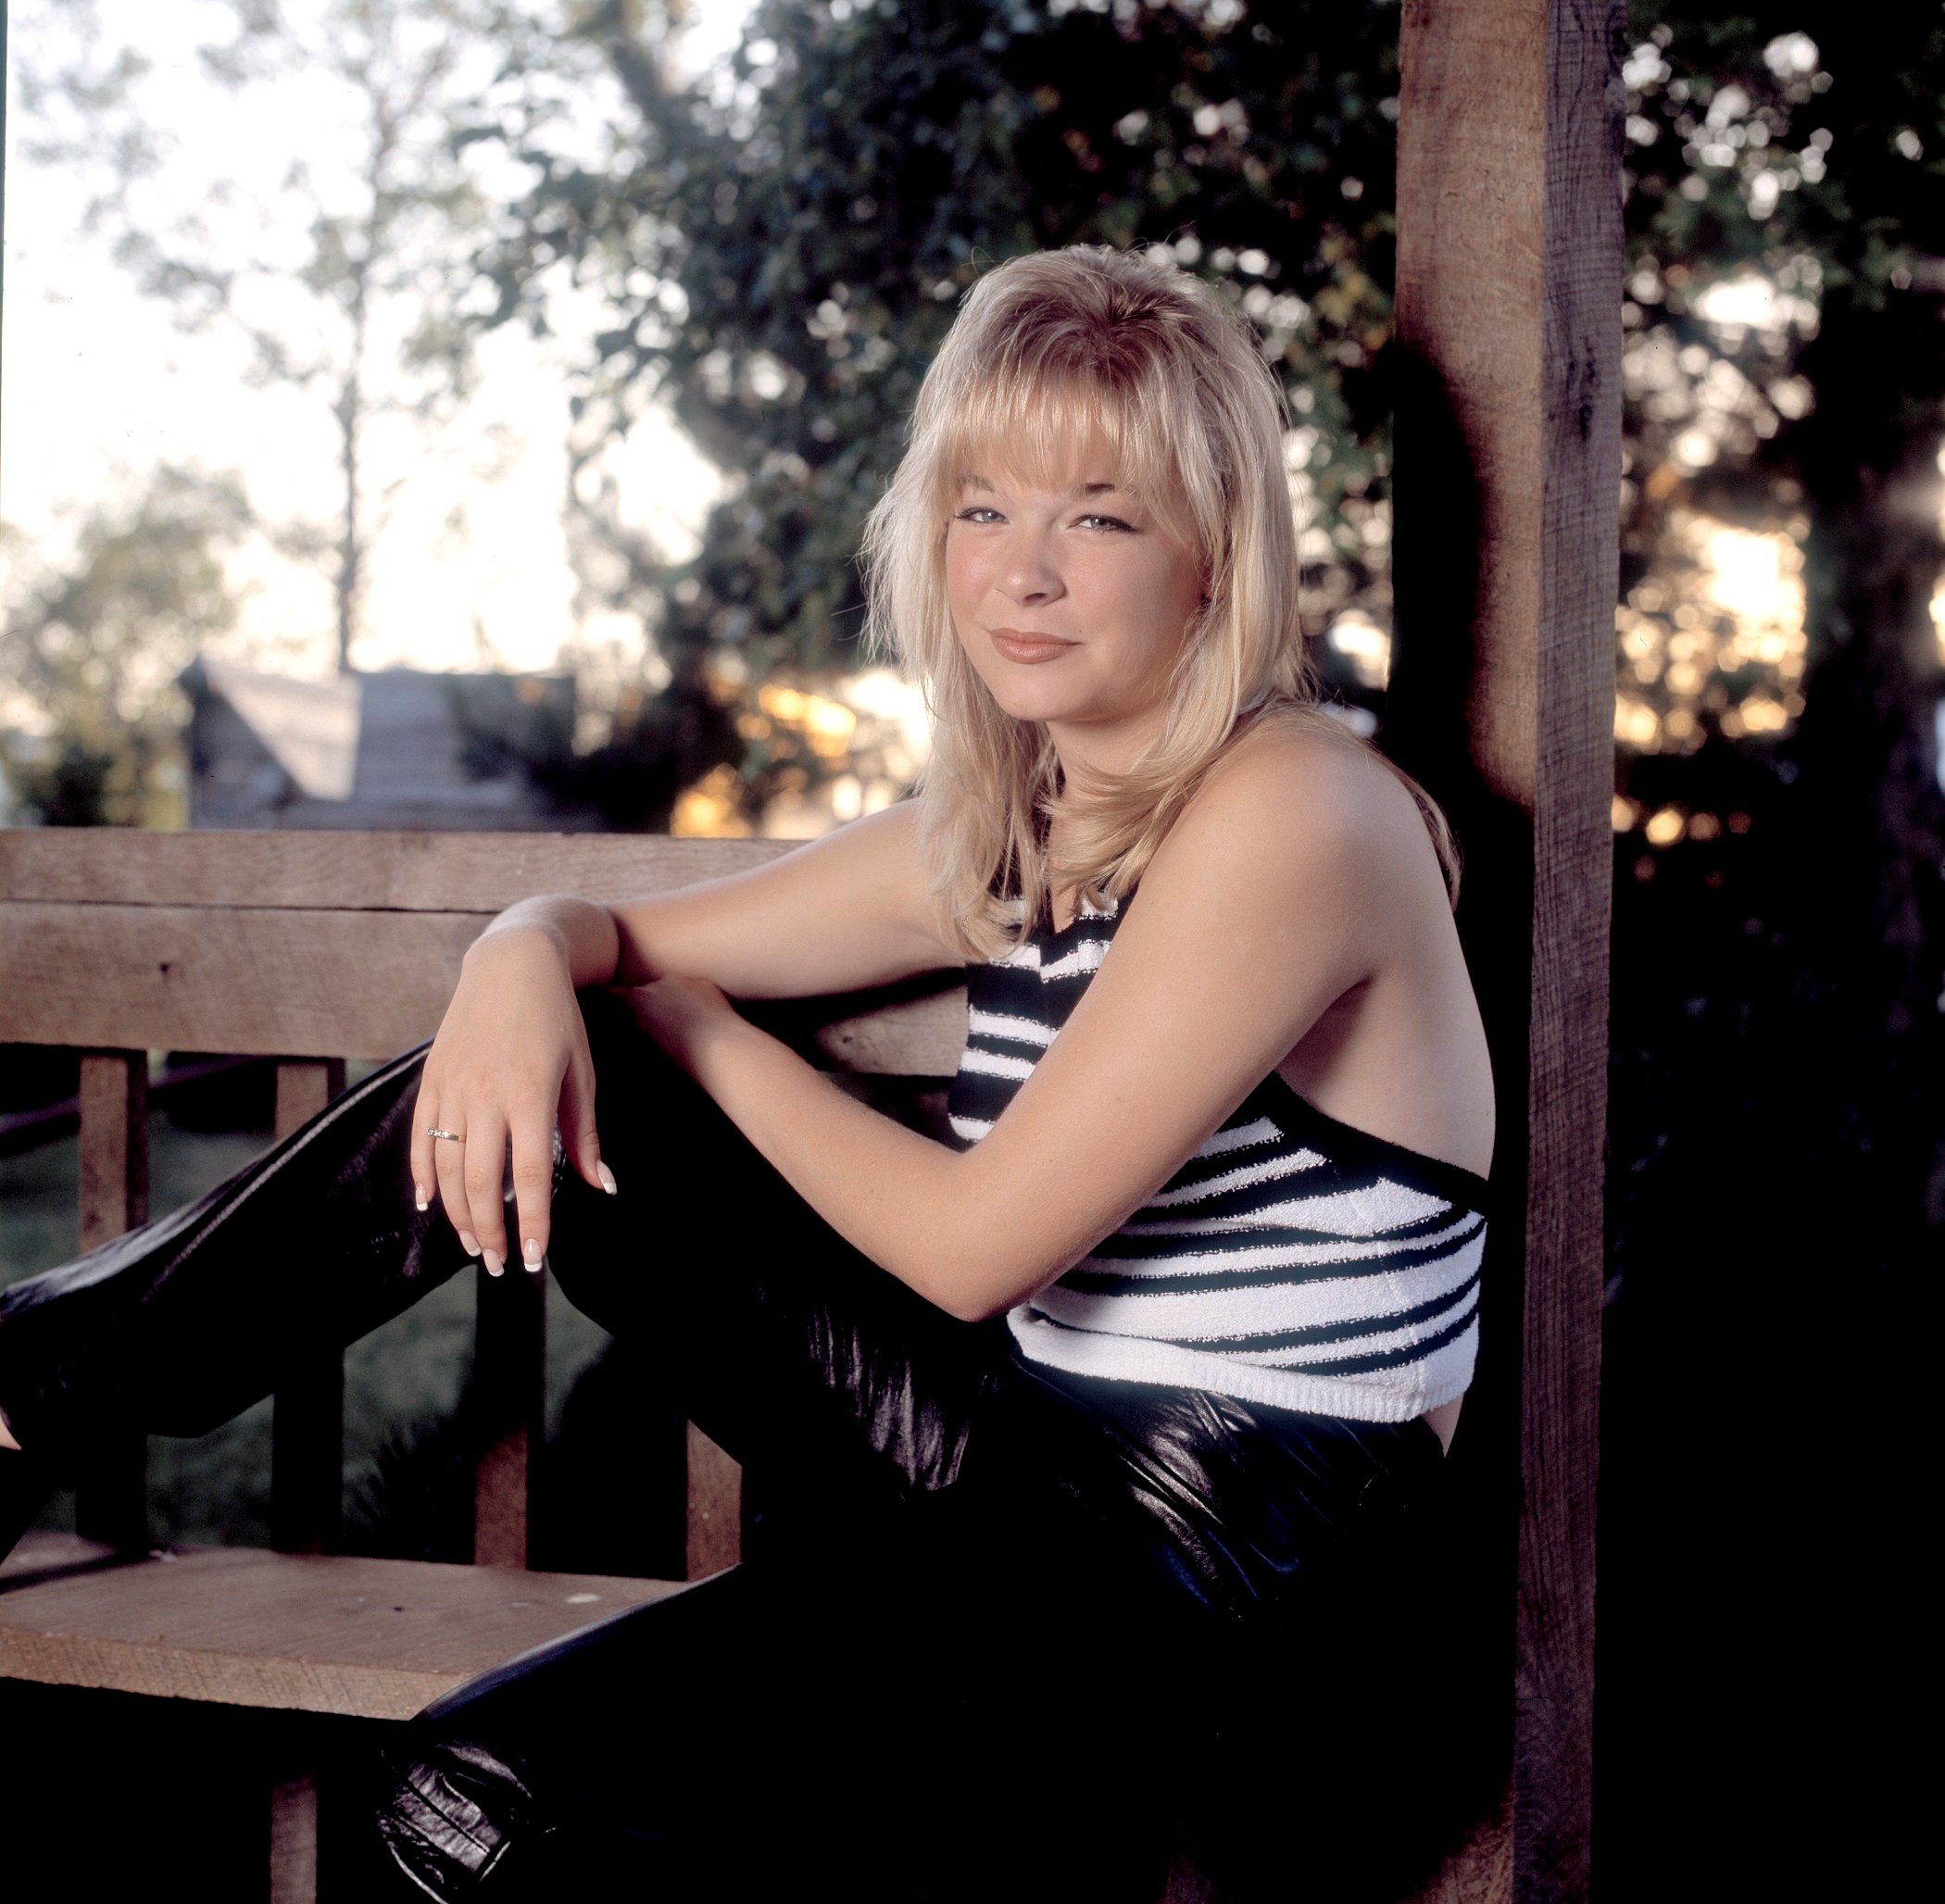 How Do I Live singer LeAnn Rimes sitting on a bench wearing a striped top